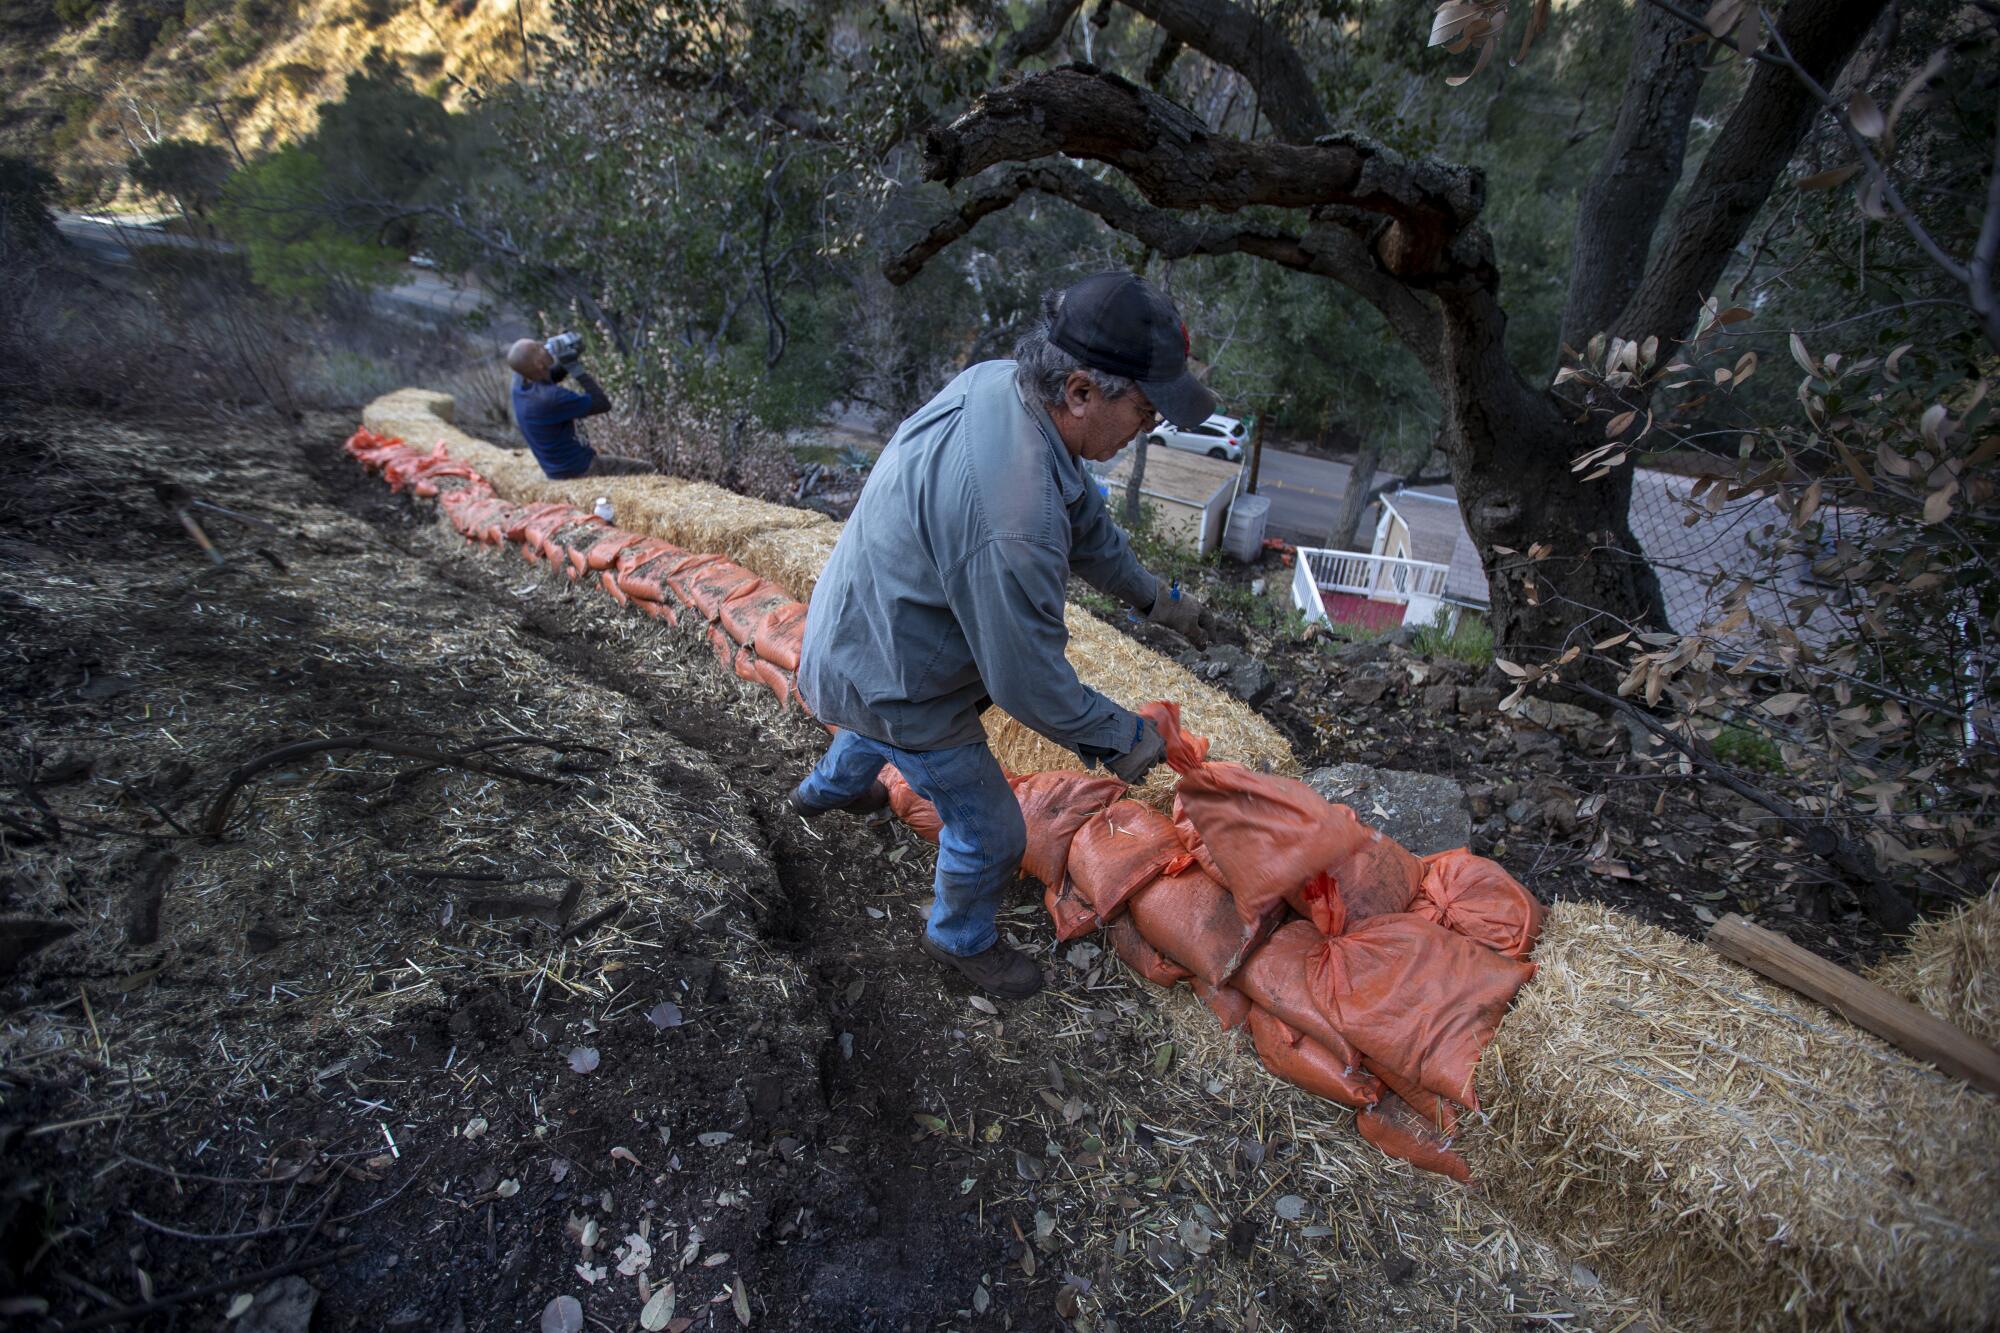 Resident Ambrose Jimenez piles up sandbags while digging a ditch to divert mudslide material away from his home.